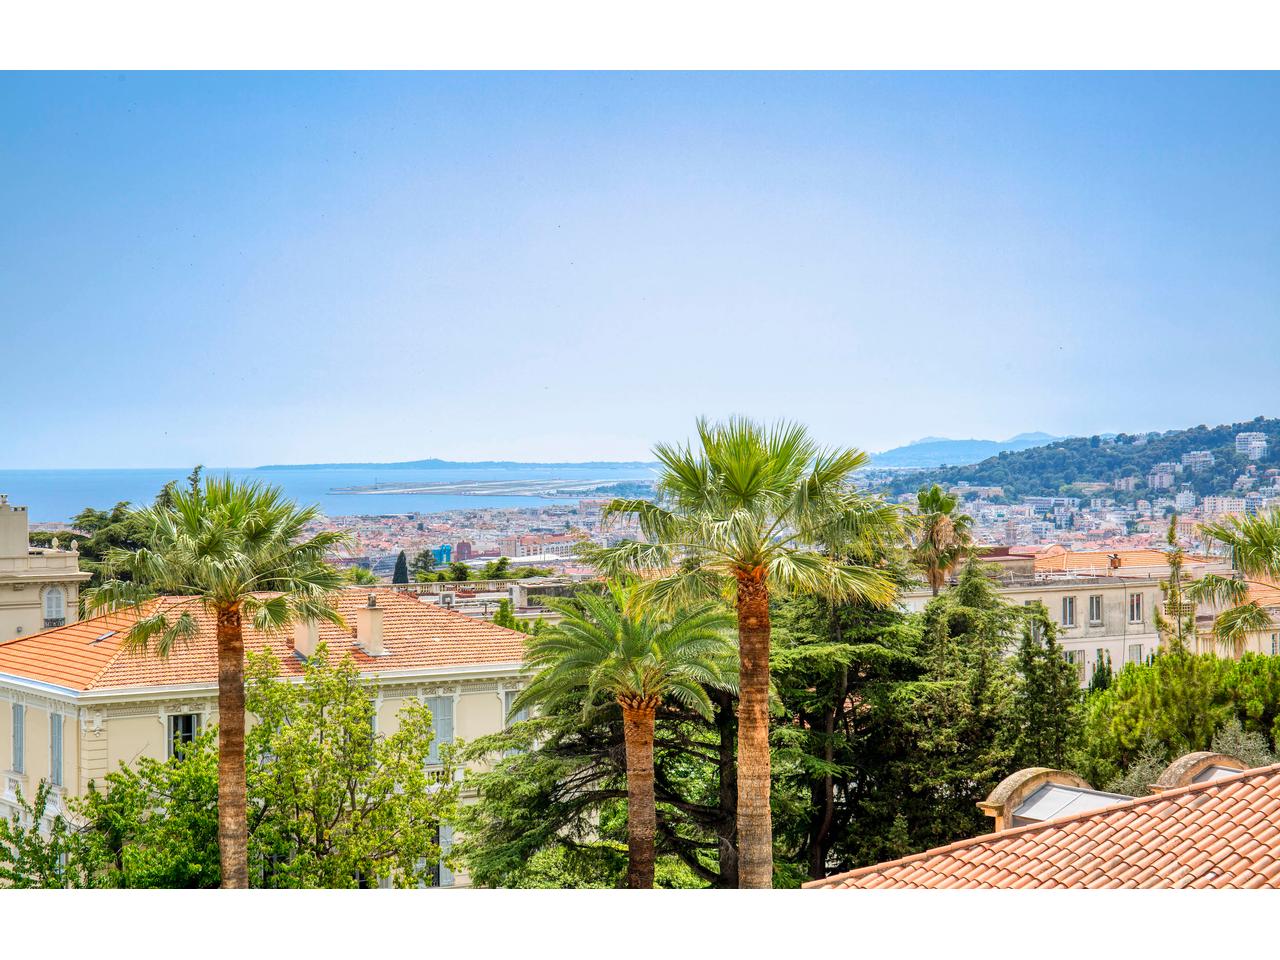 Nice Riviera - Agence Immobiliére Nice Côte d'Azur | NICE CIMIEZ - EXCEPTIONAL APARTMENT WITH 90M2 TERRACE IN HISTORIC BUILDING